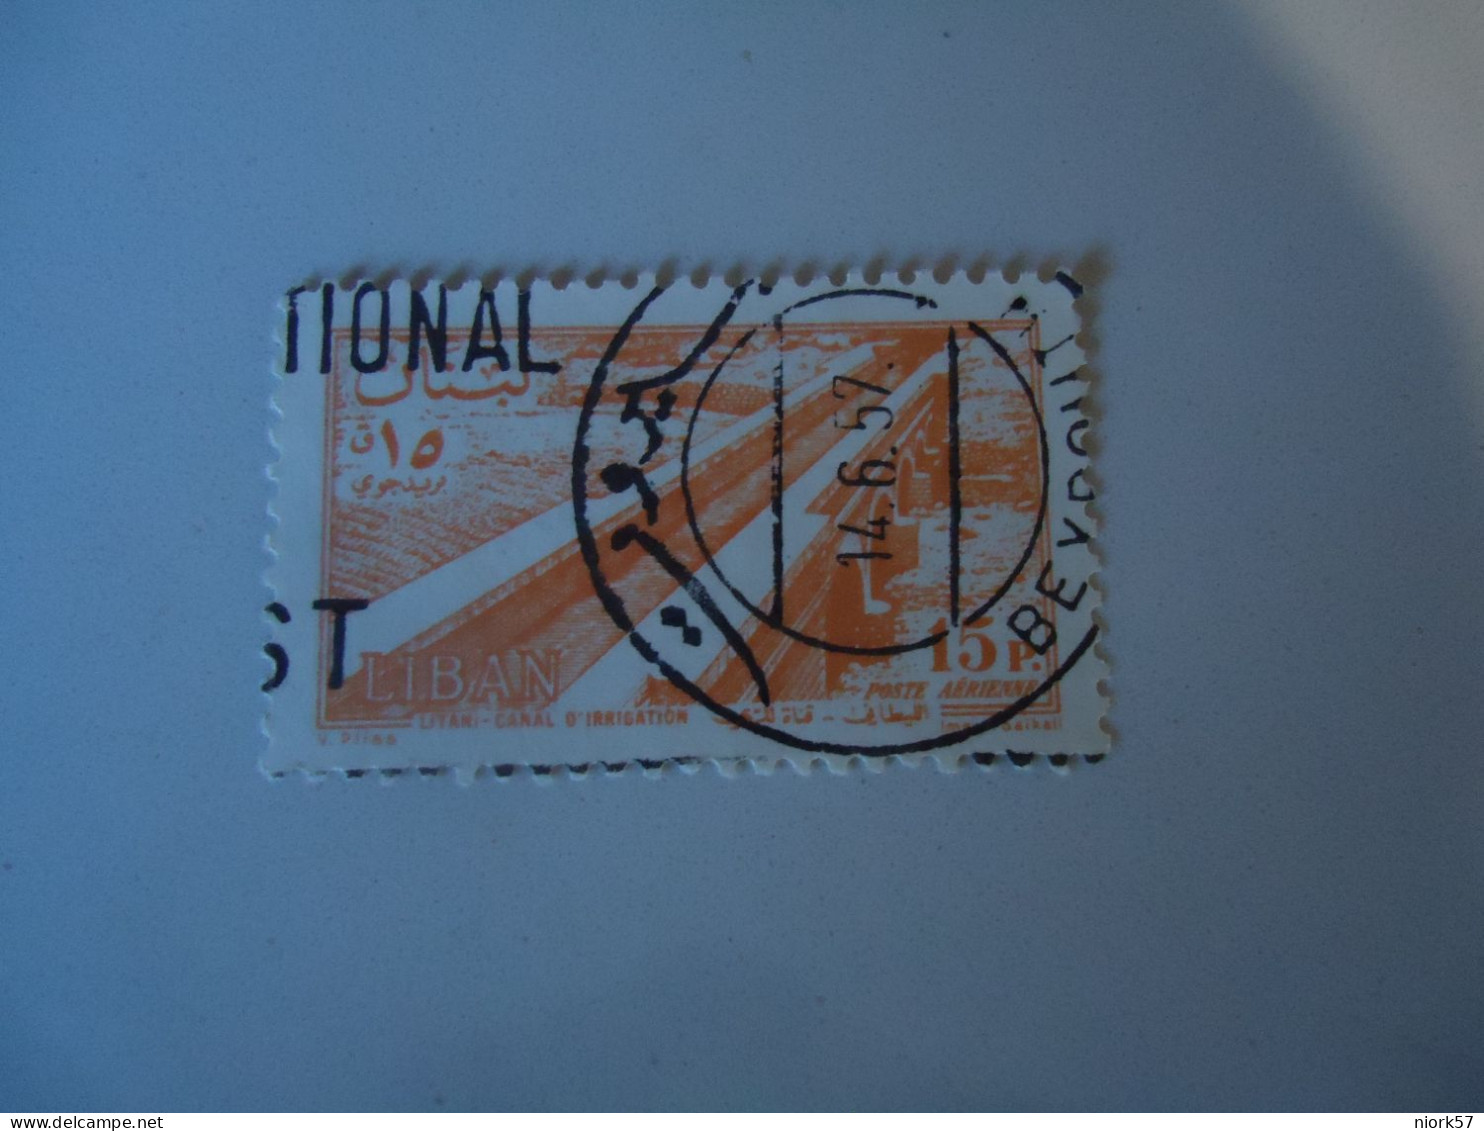 LIBAN  LEBANON USED     STAMPS  LANDSCAPES MOMUMENTS TRAINS   WITH POSTMARK BEYTHOUTH 1957 - Lebanon